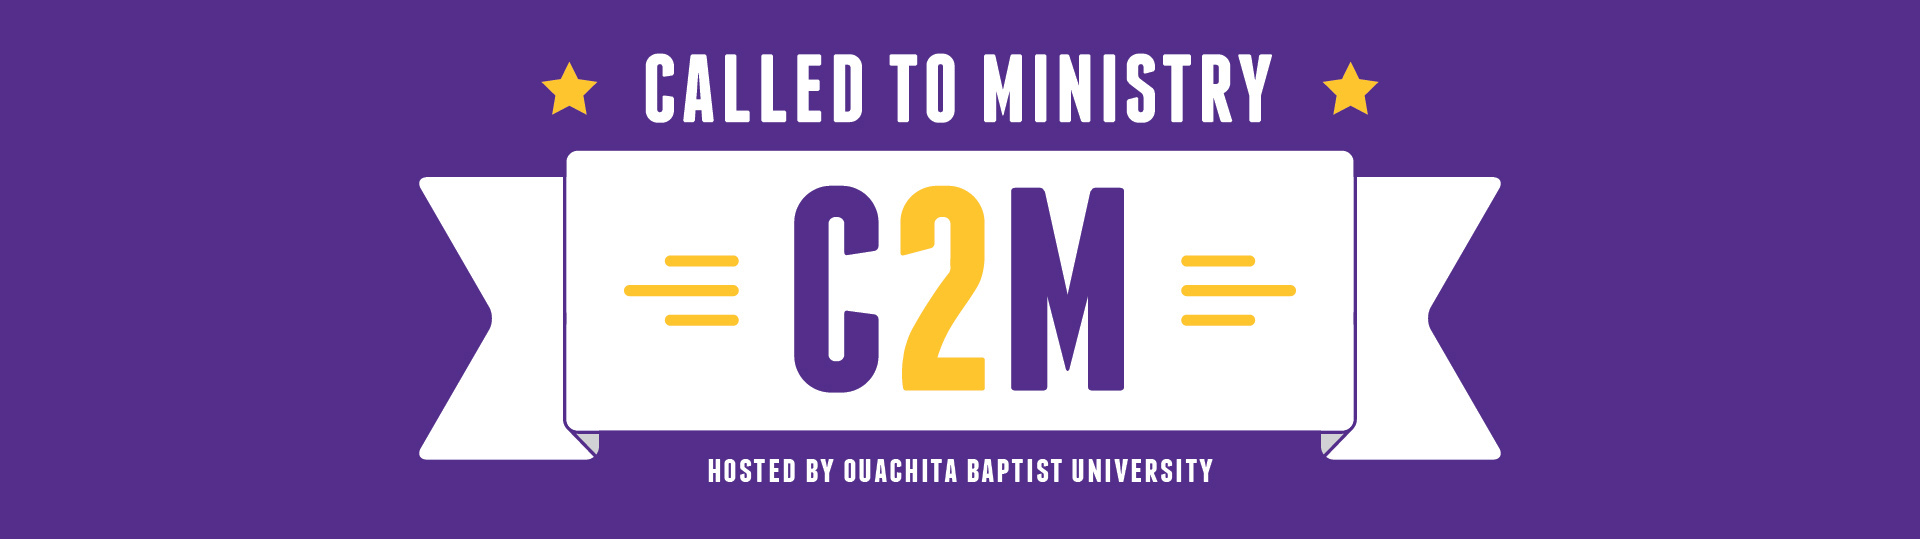 Ouachita to host Called 2 Ministry Retreat for high school students July 28-29.